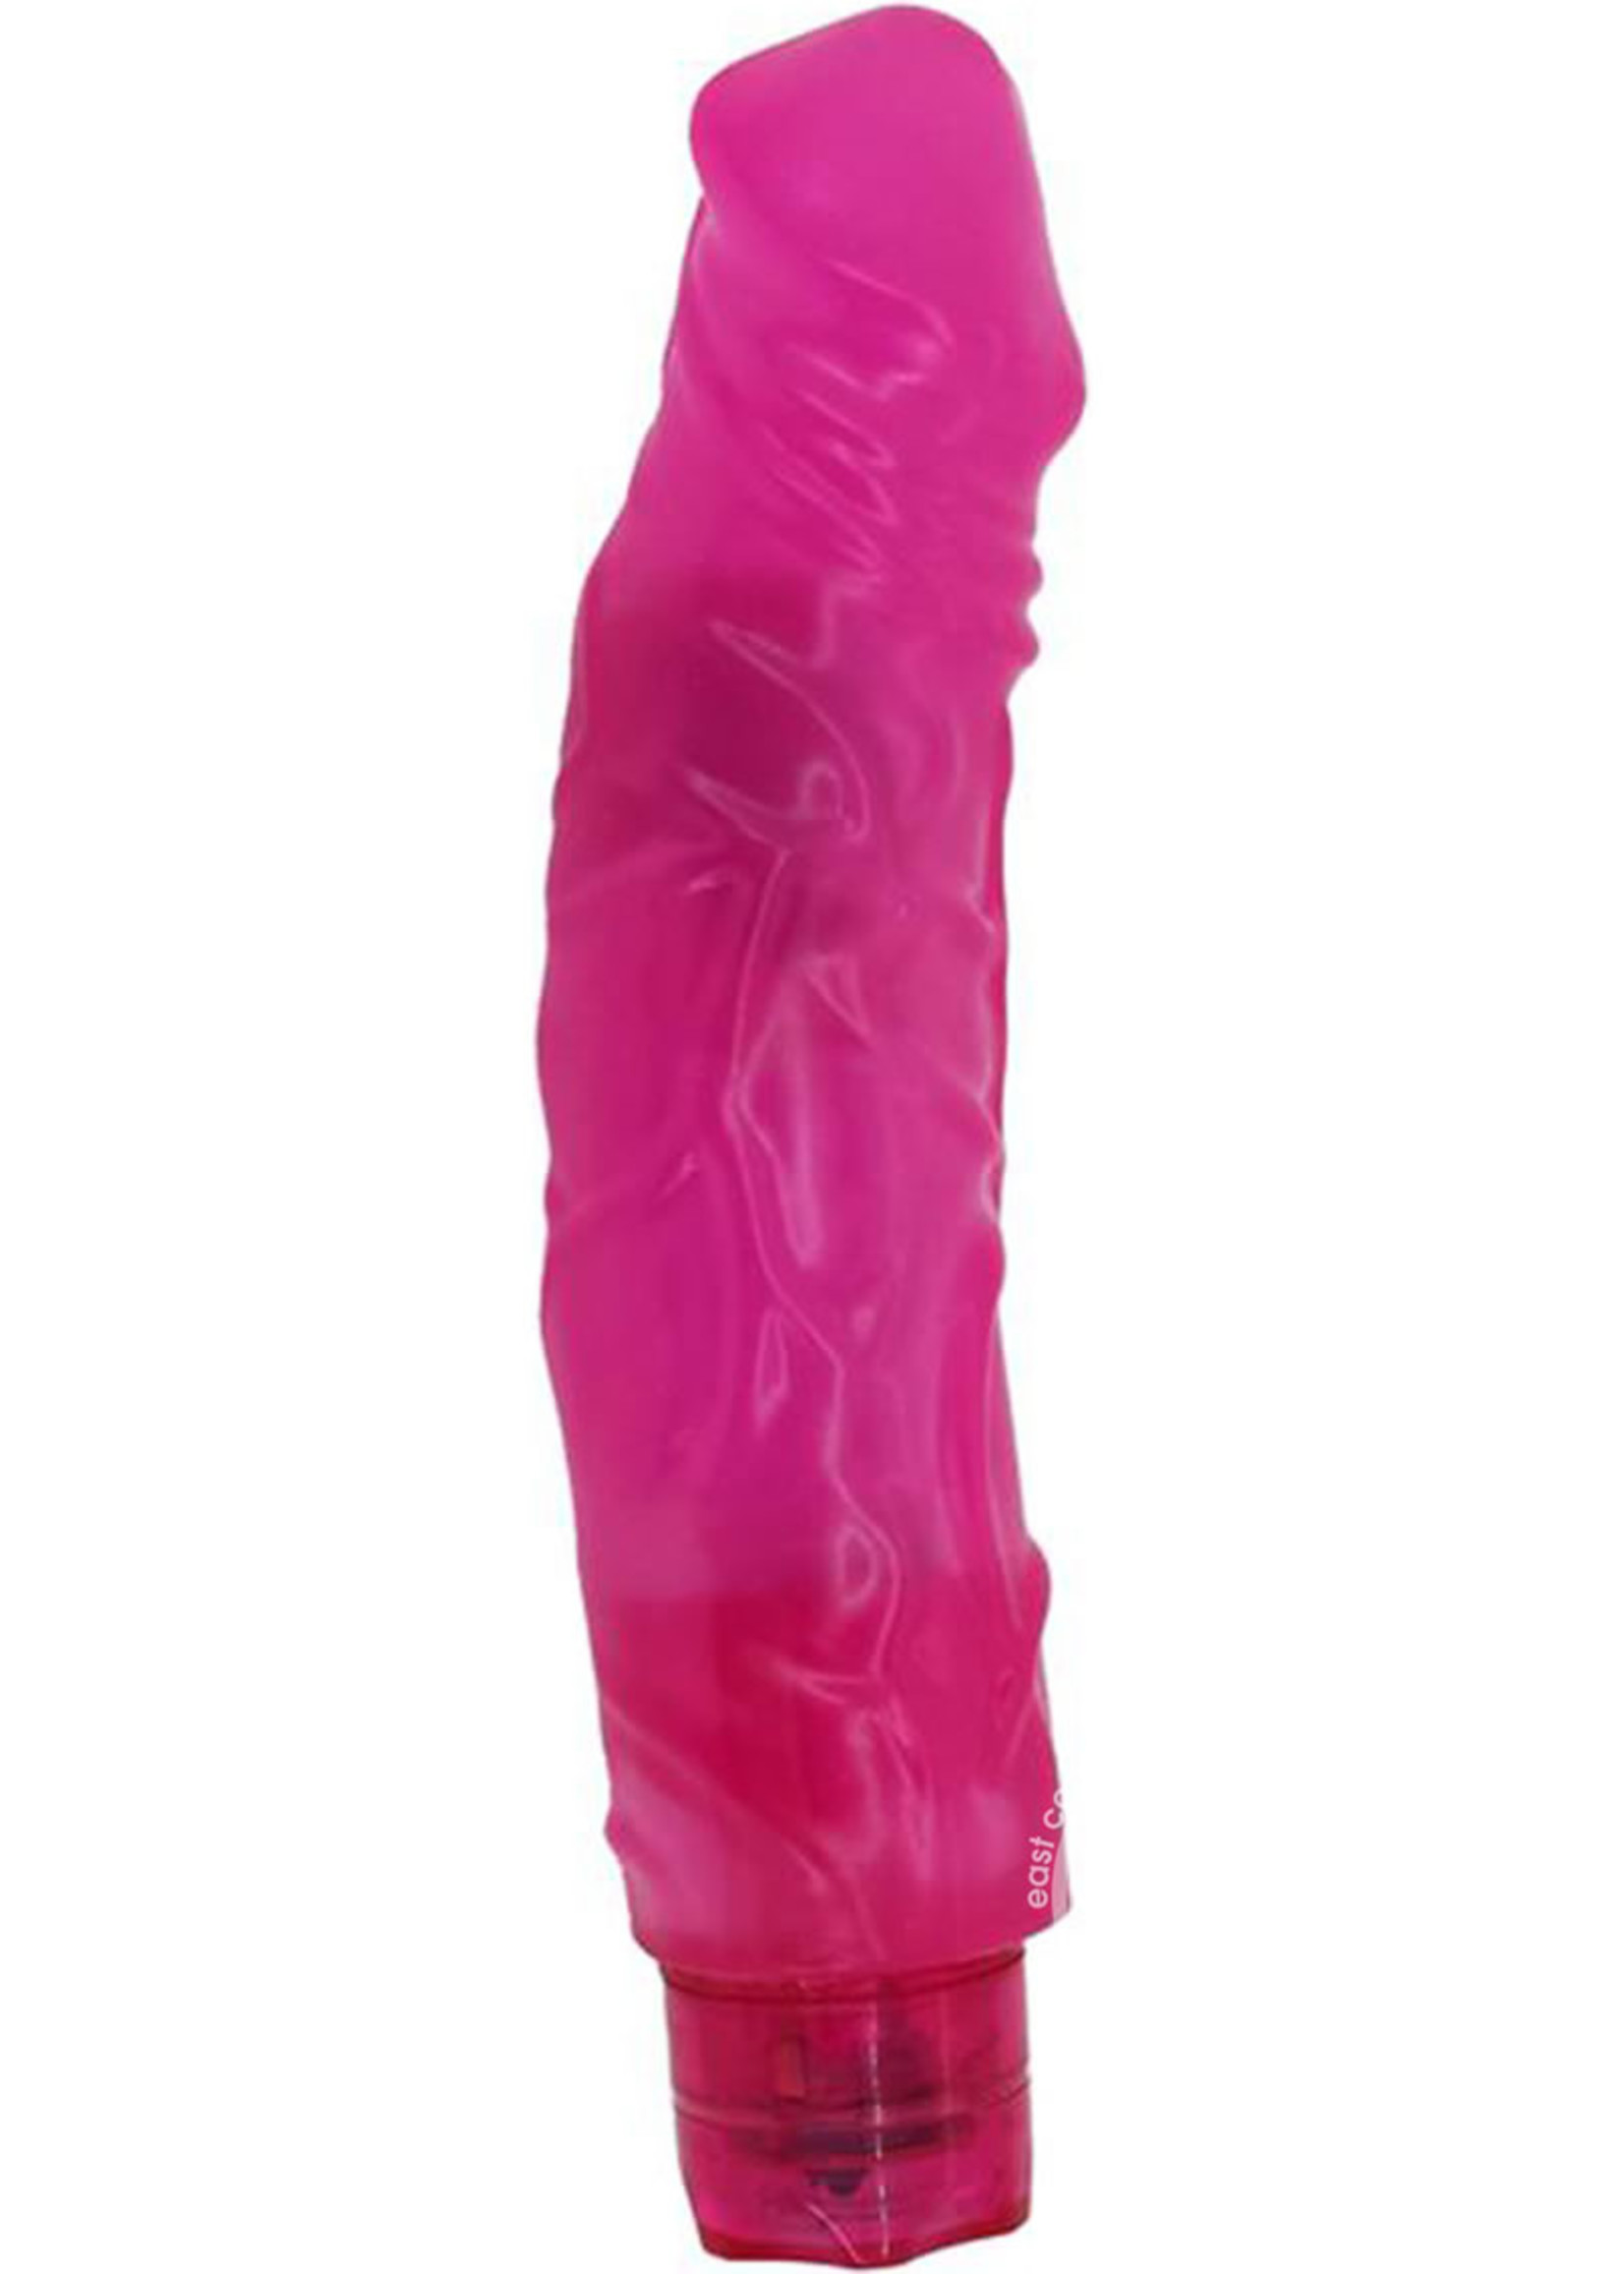 Crystal Caribbean Number 5 Jelly Vibrator in Pink